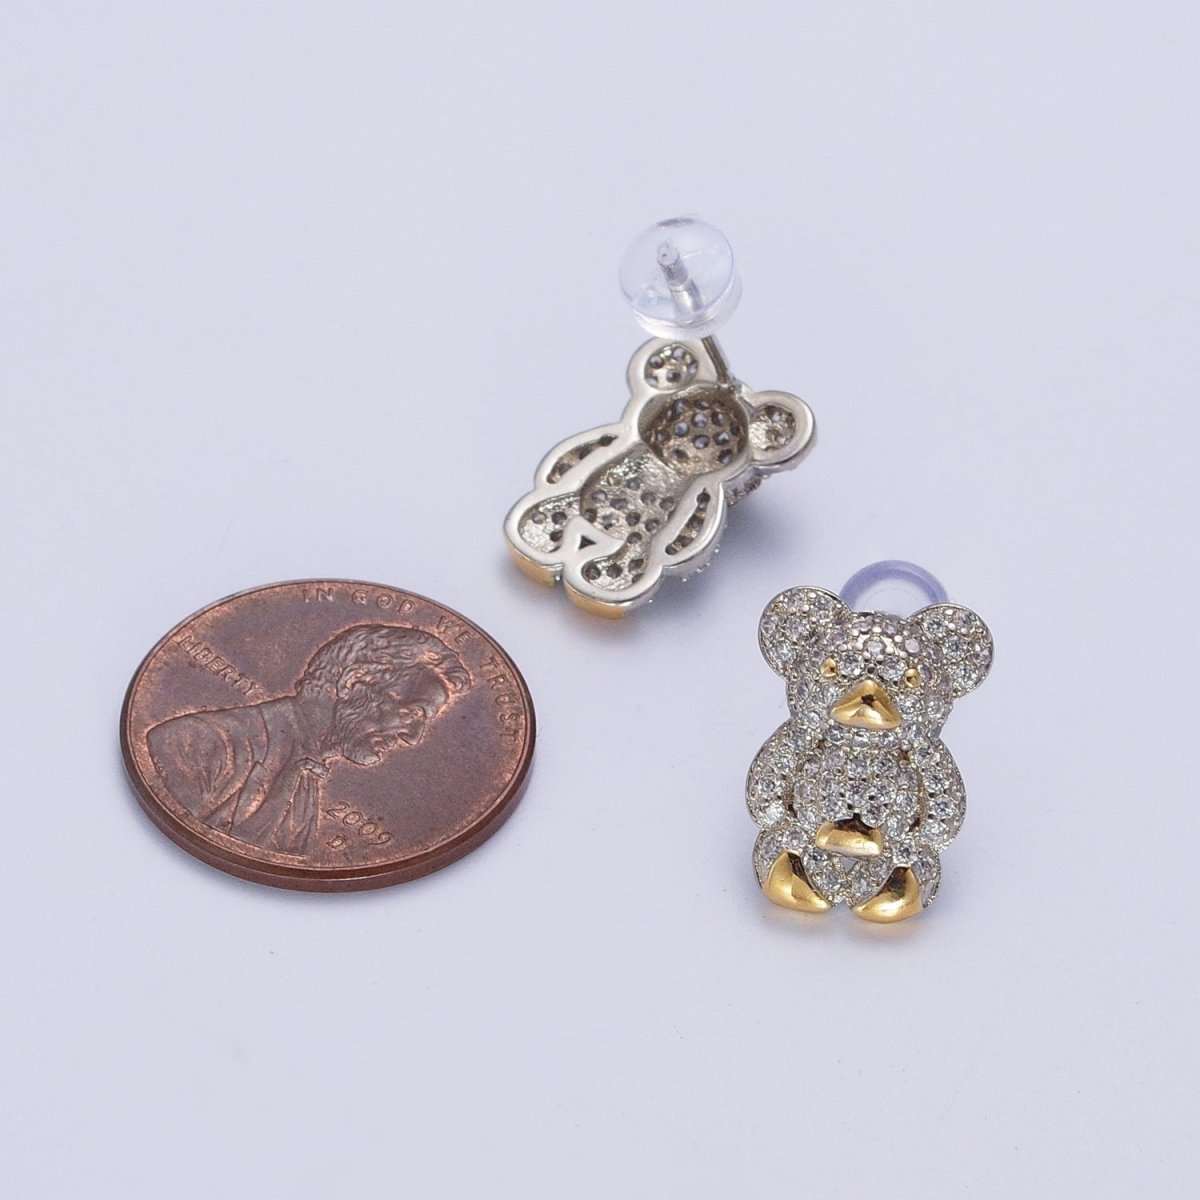 Clear Micro Paved Gold Teddy Bear Stud Earrings For Nature Jewelry Making | P-282 - DLUXCA